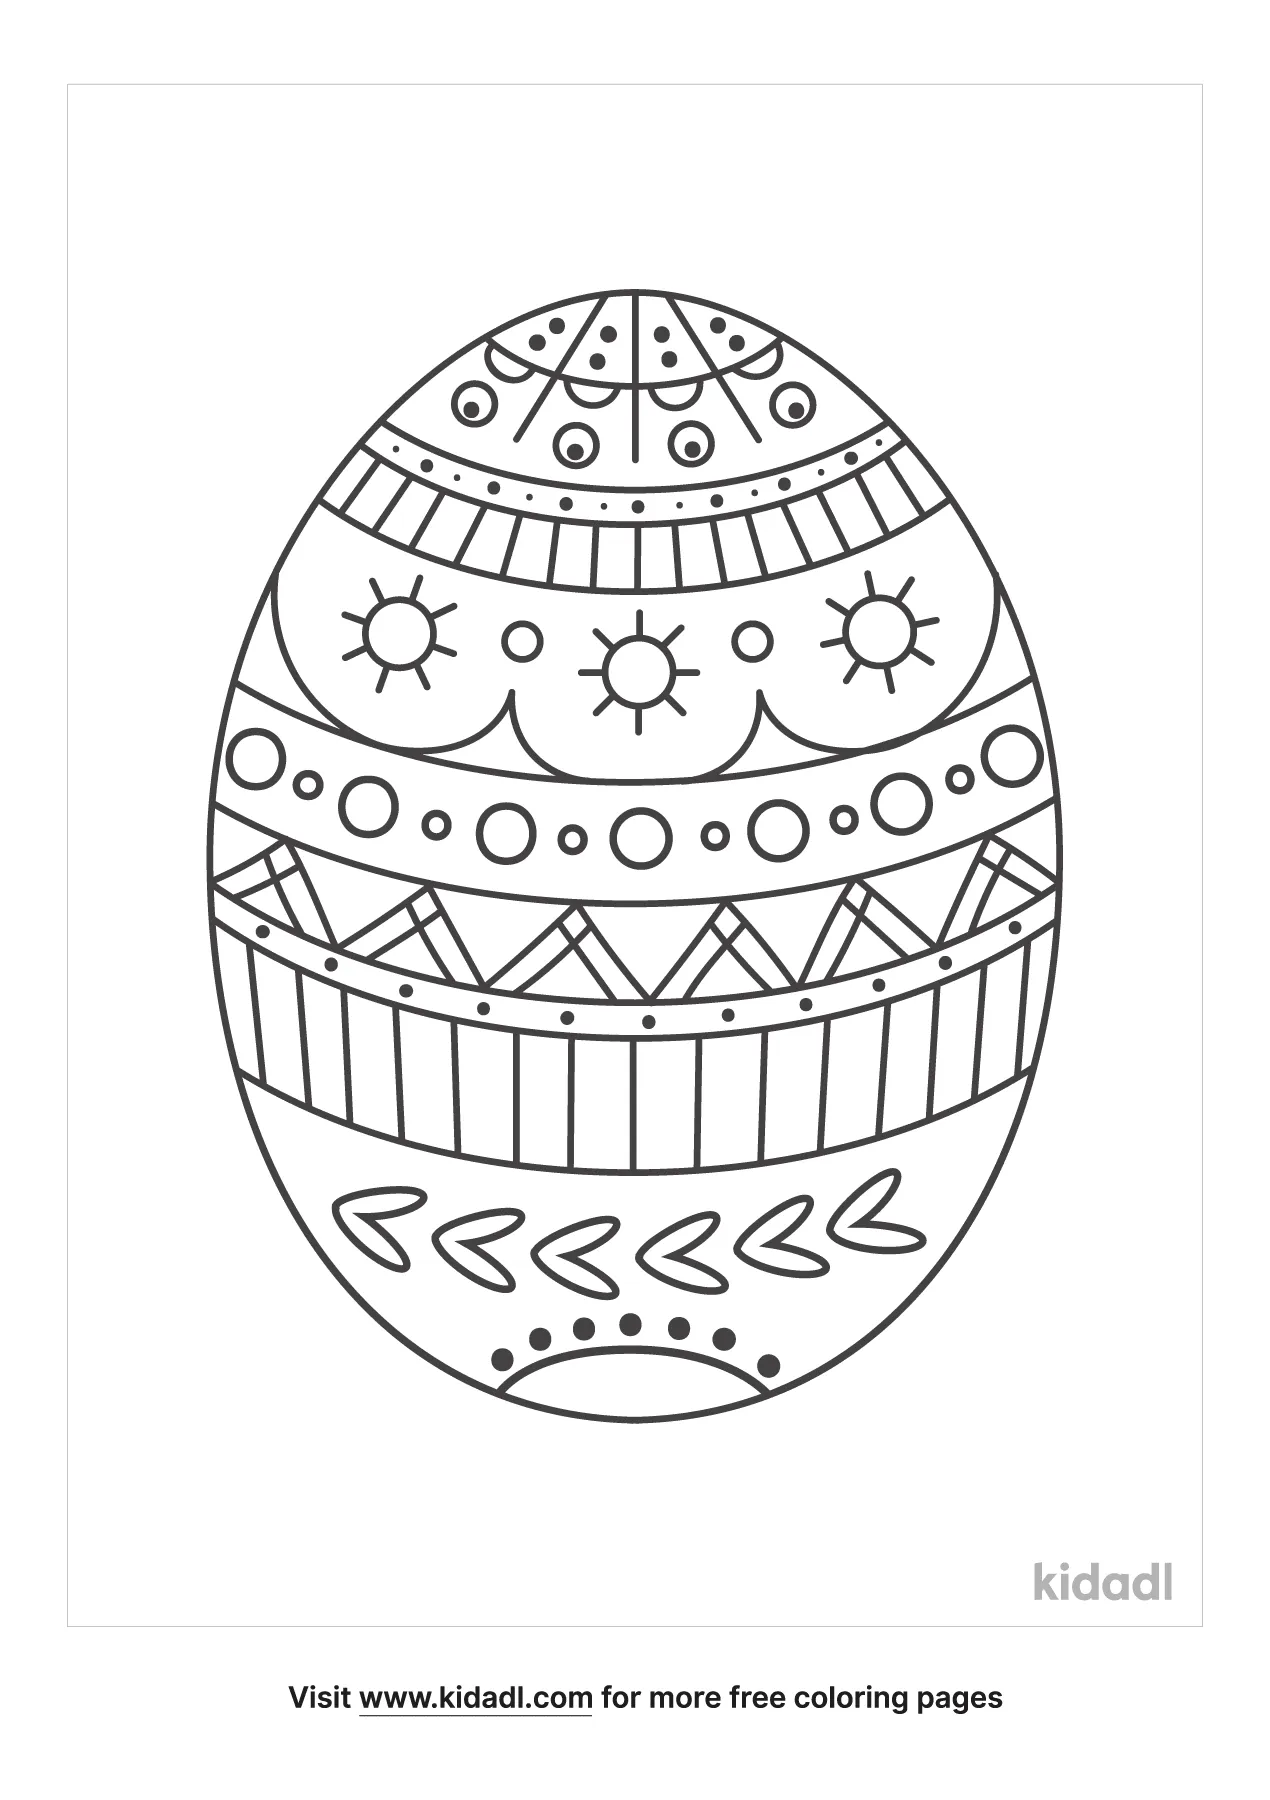 Free pysanky coloring page coloring page printables